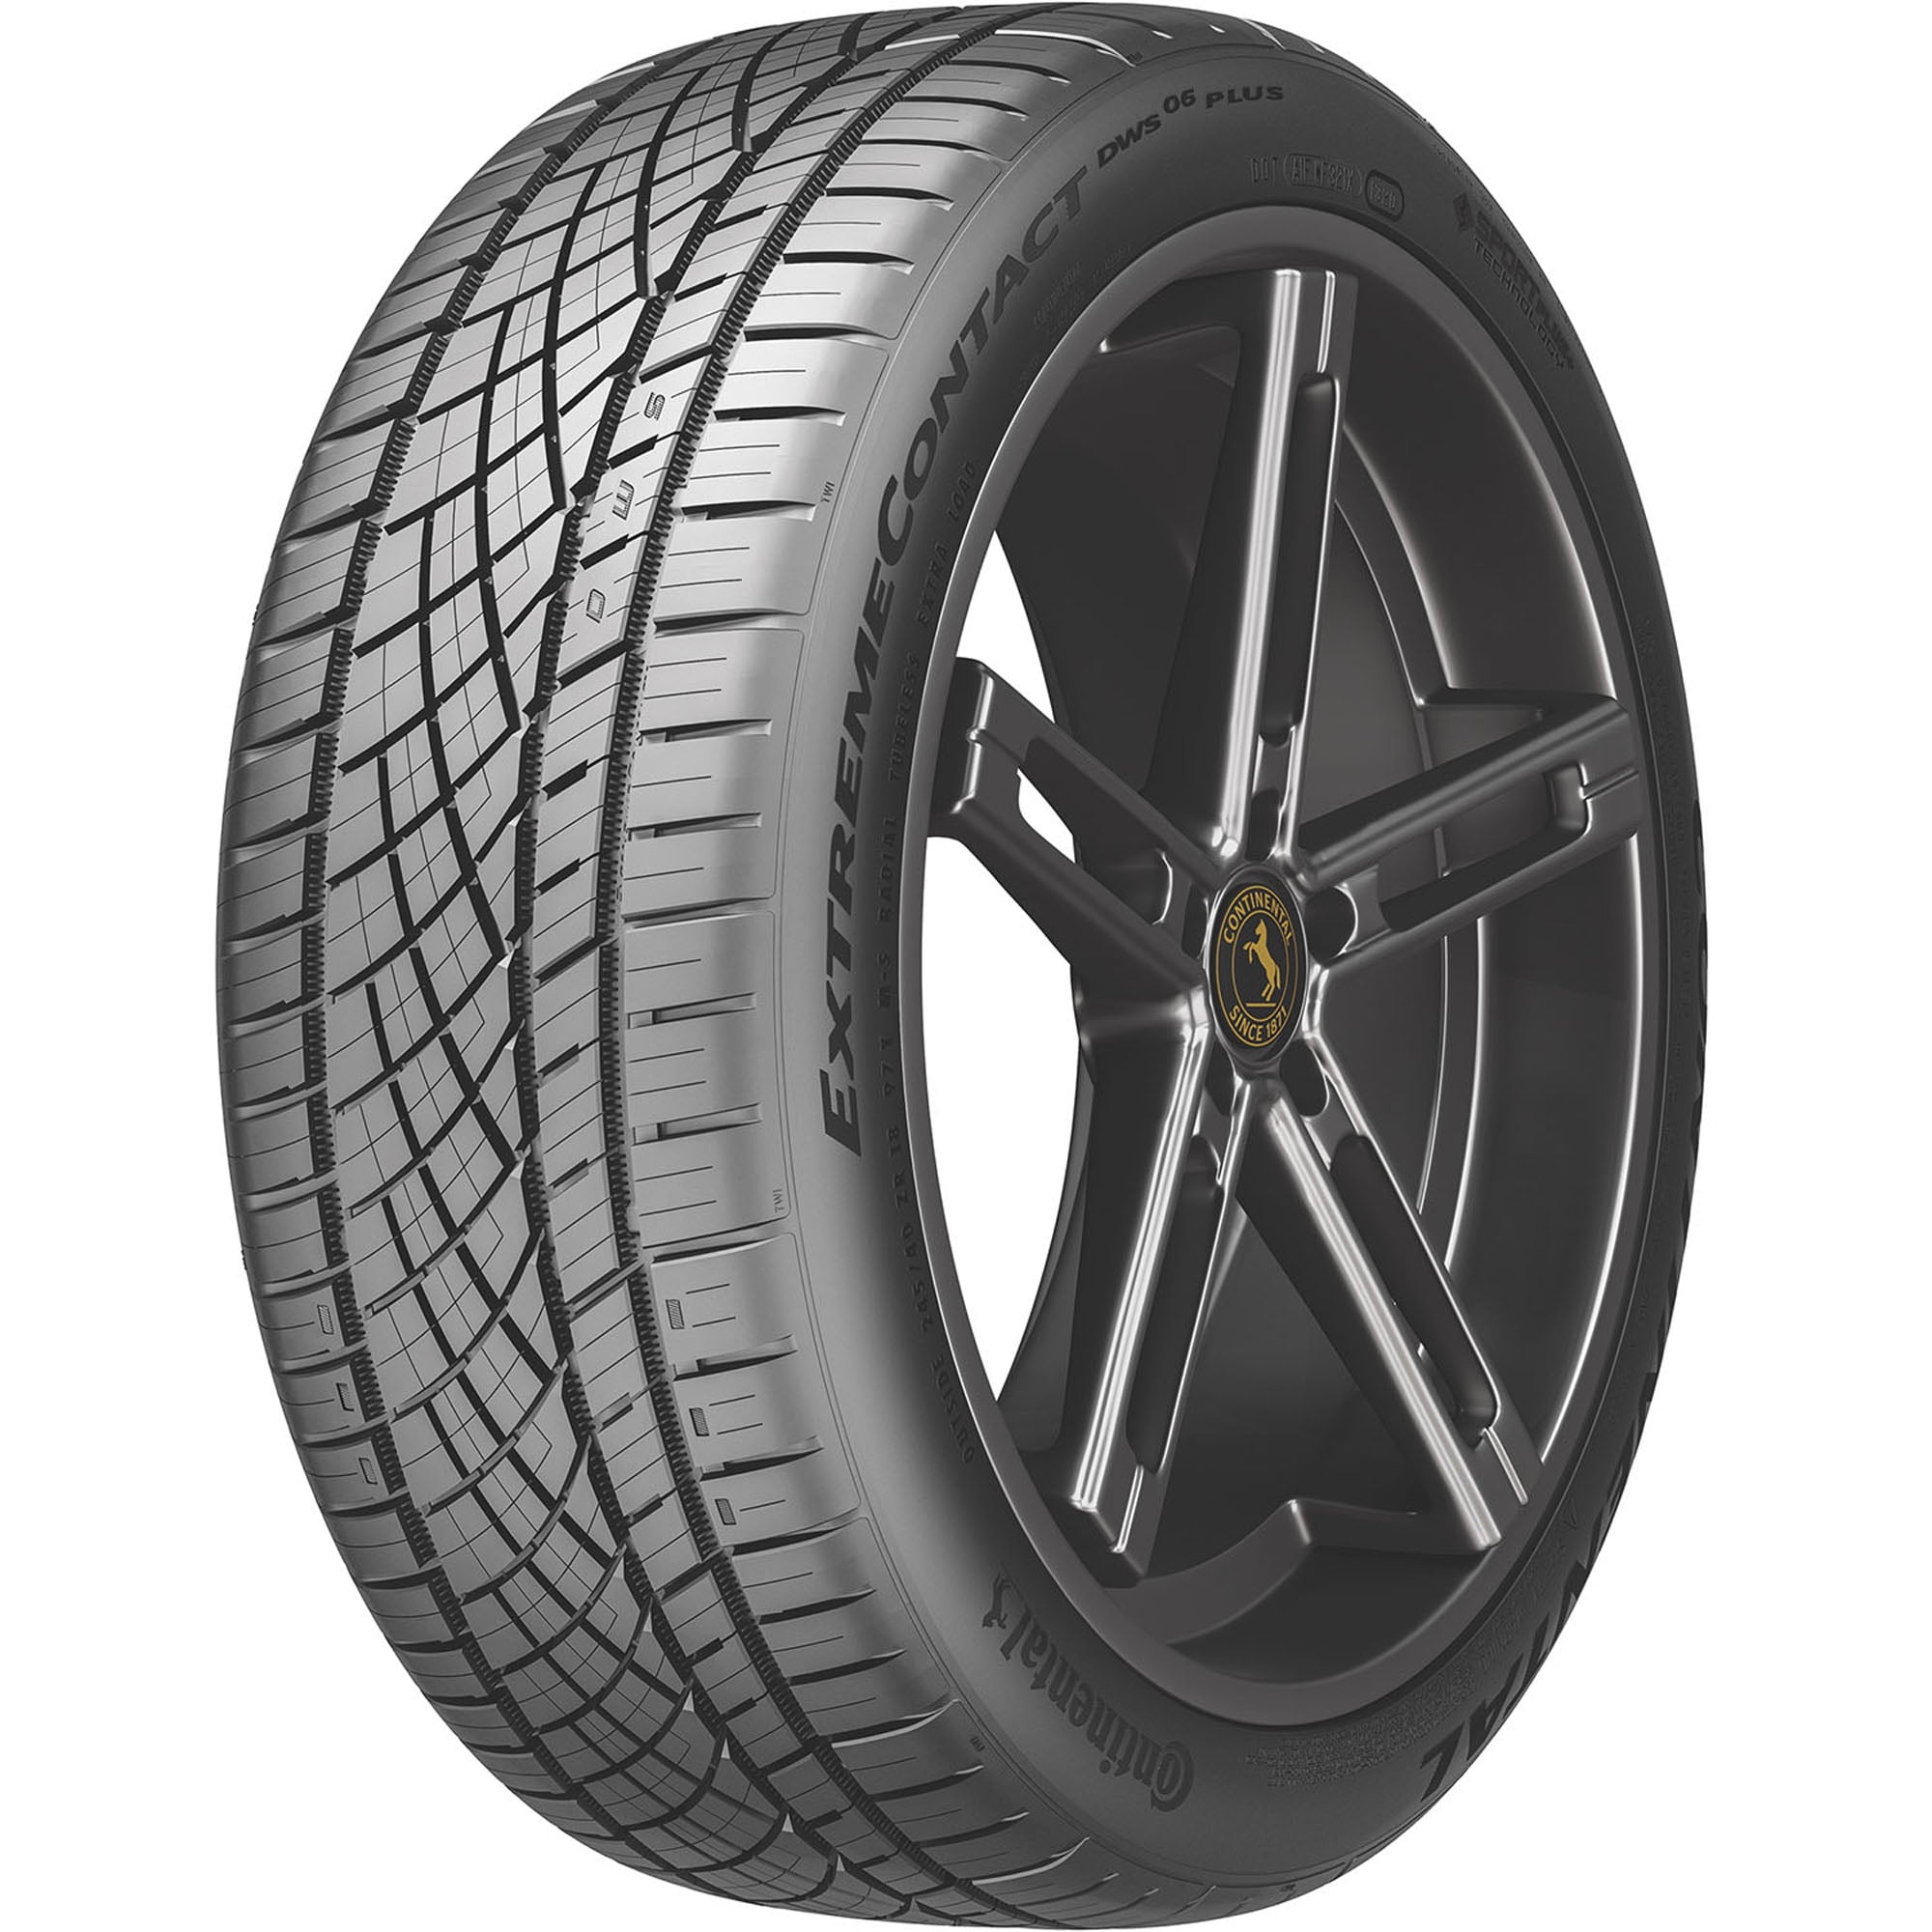 Continental ExtremeContact DWS06 PLUS UHP All Season 245/35ZR20 95Y XL  Passenger Tire